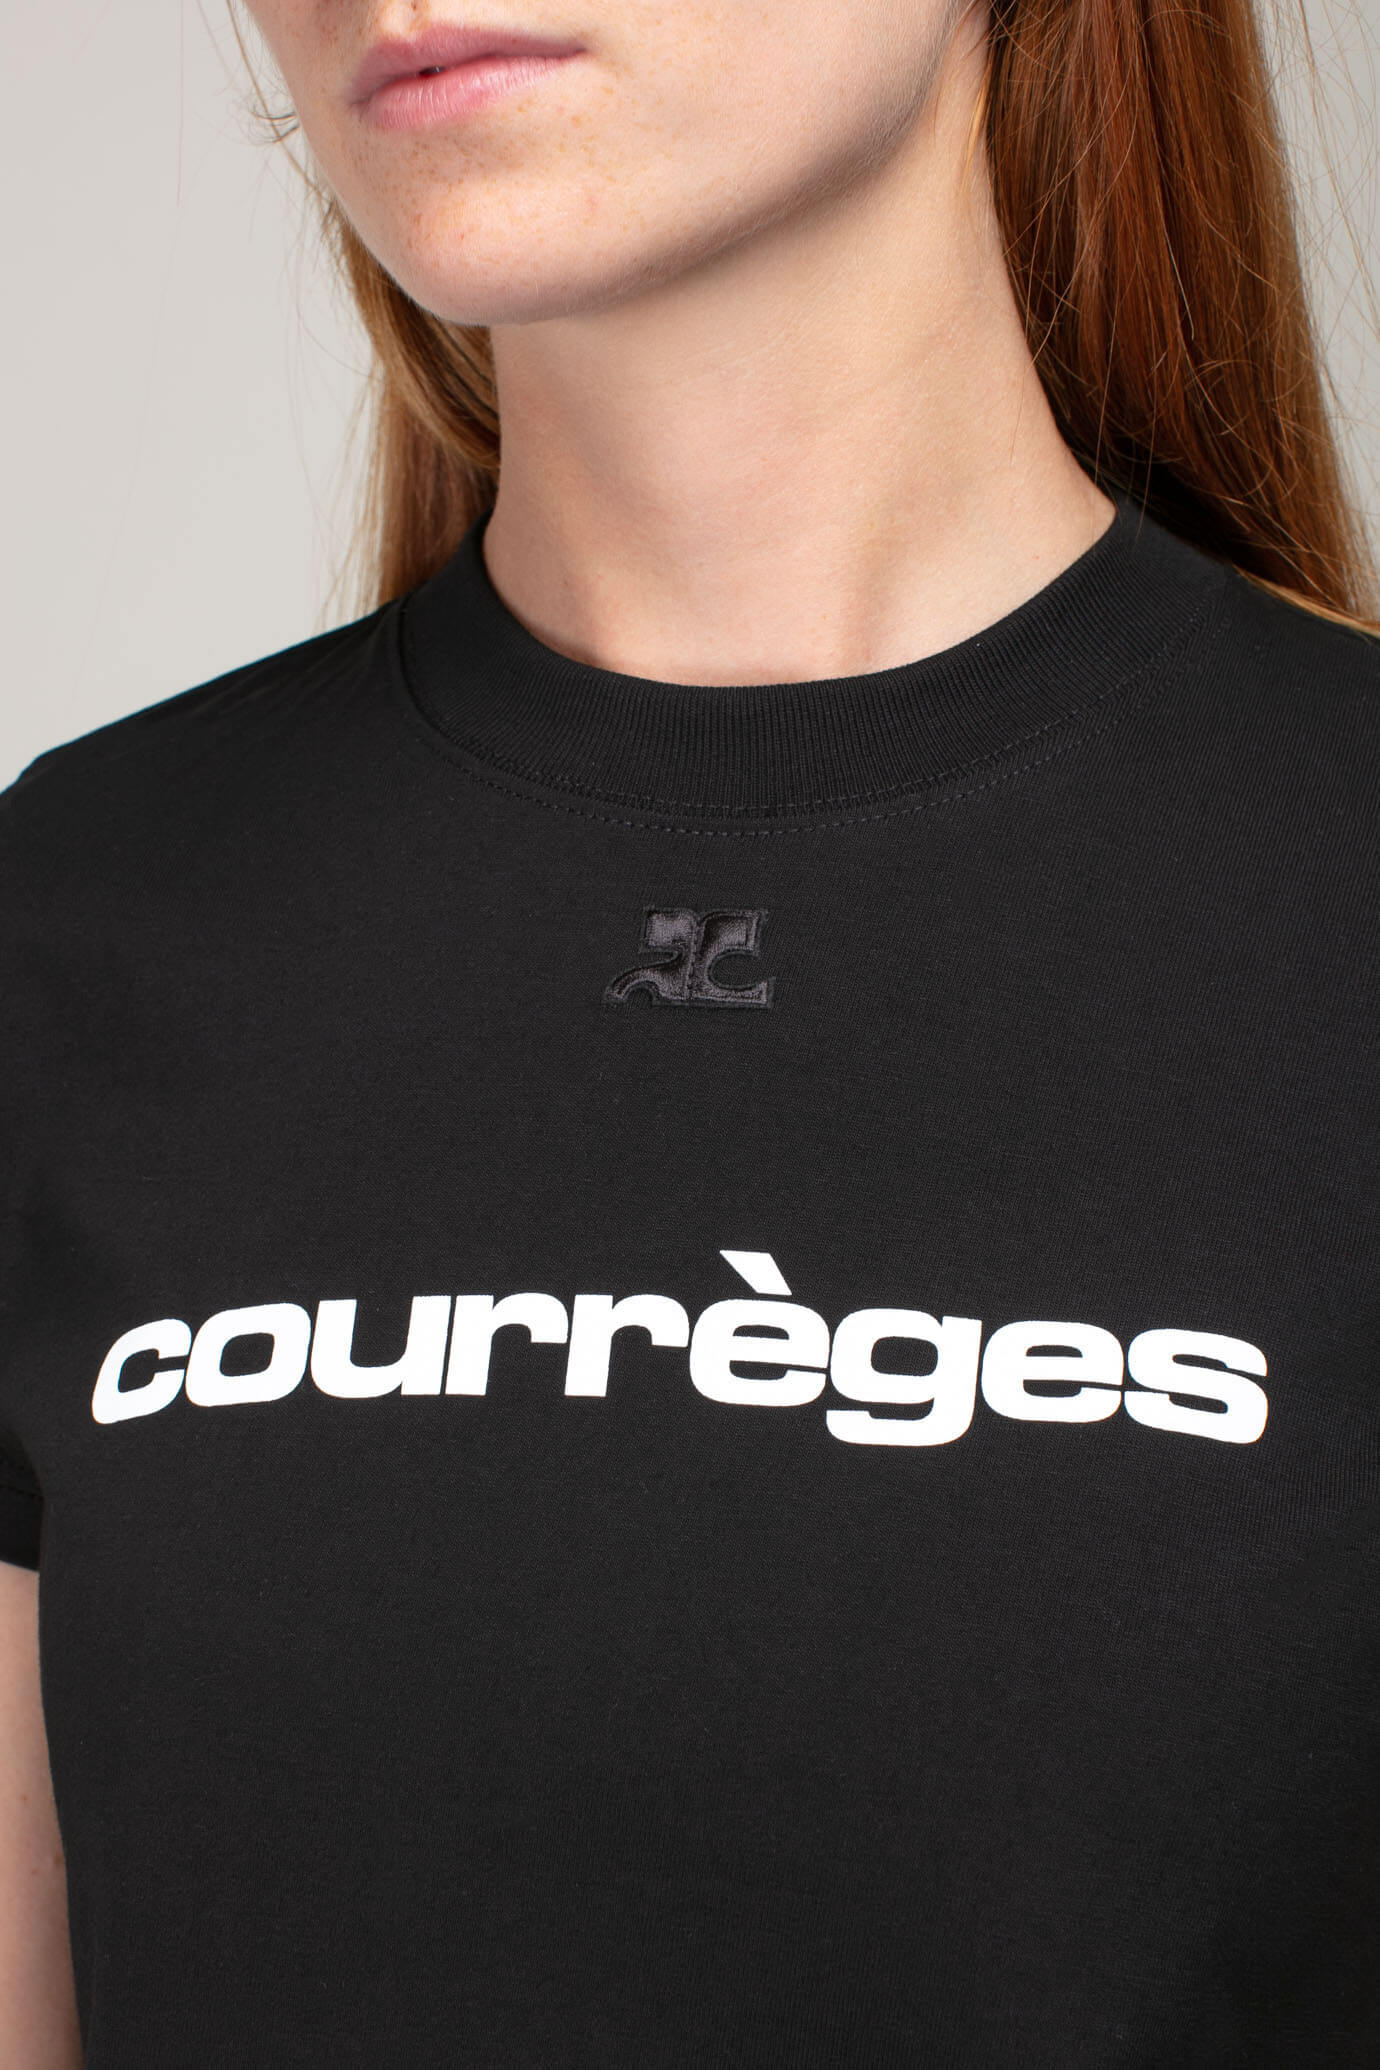 courreges トップス